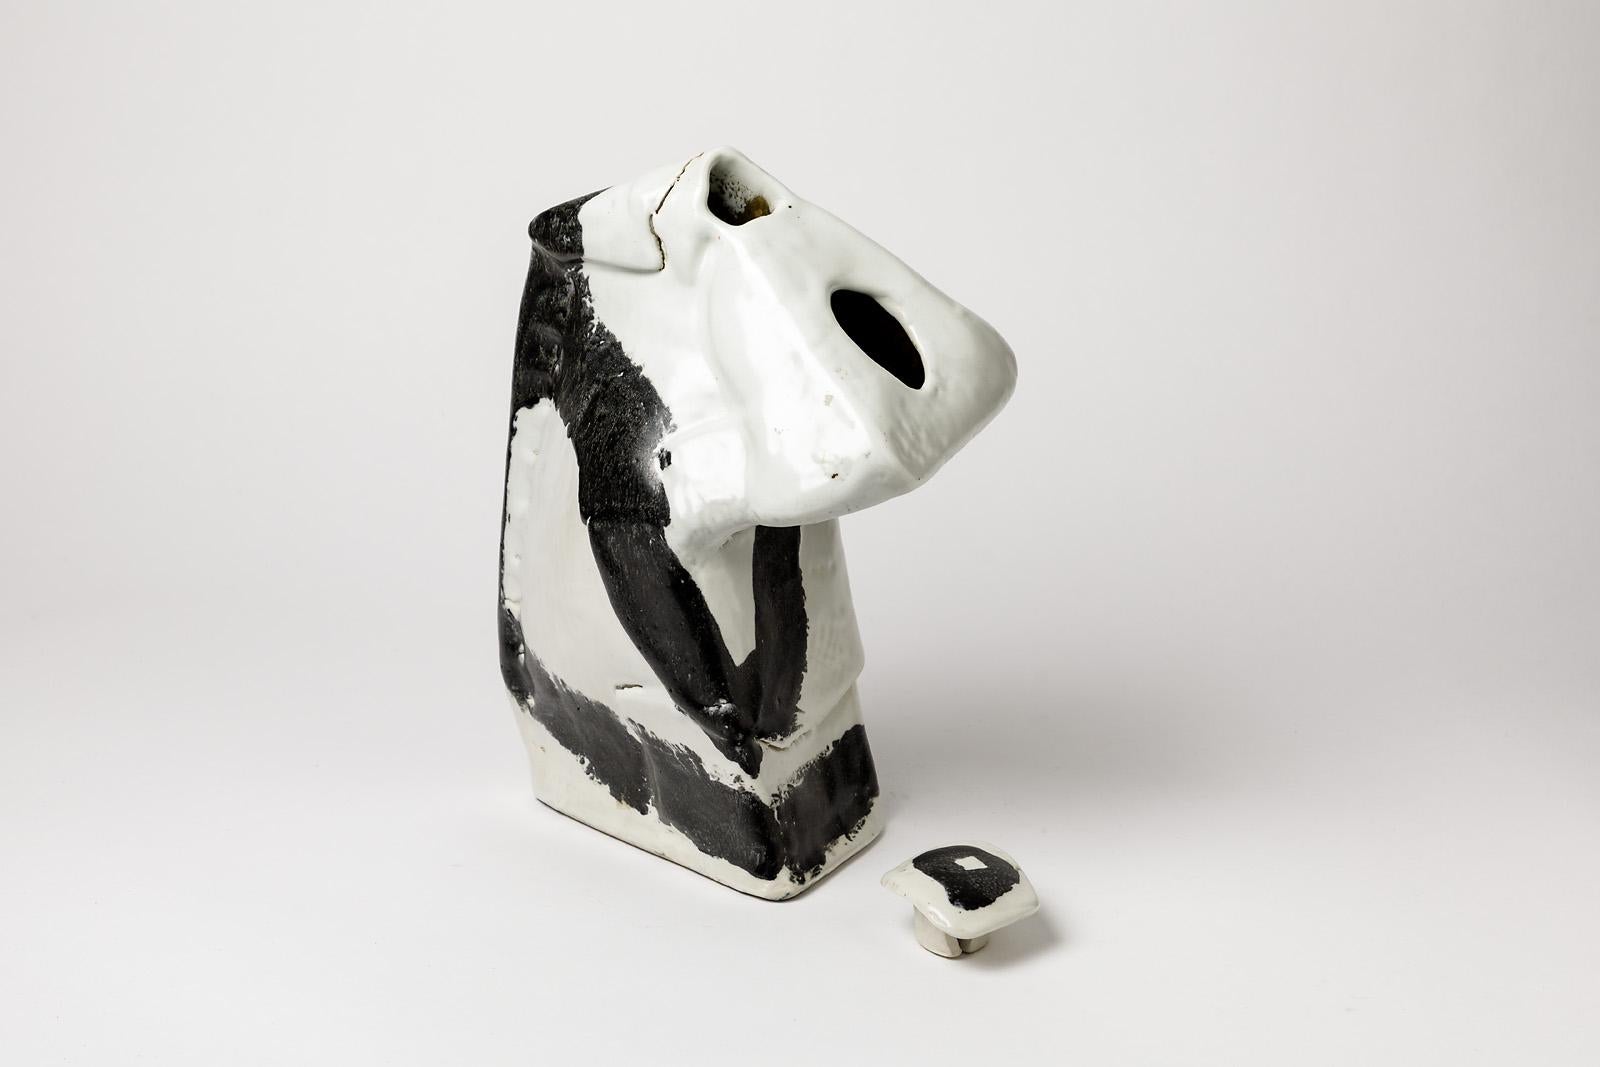 French Porcelain Ceramic Vase Sculpture by Michel Lanos White and Black Pottery Glaze For Sale